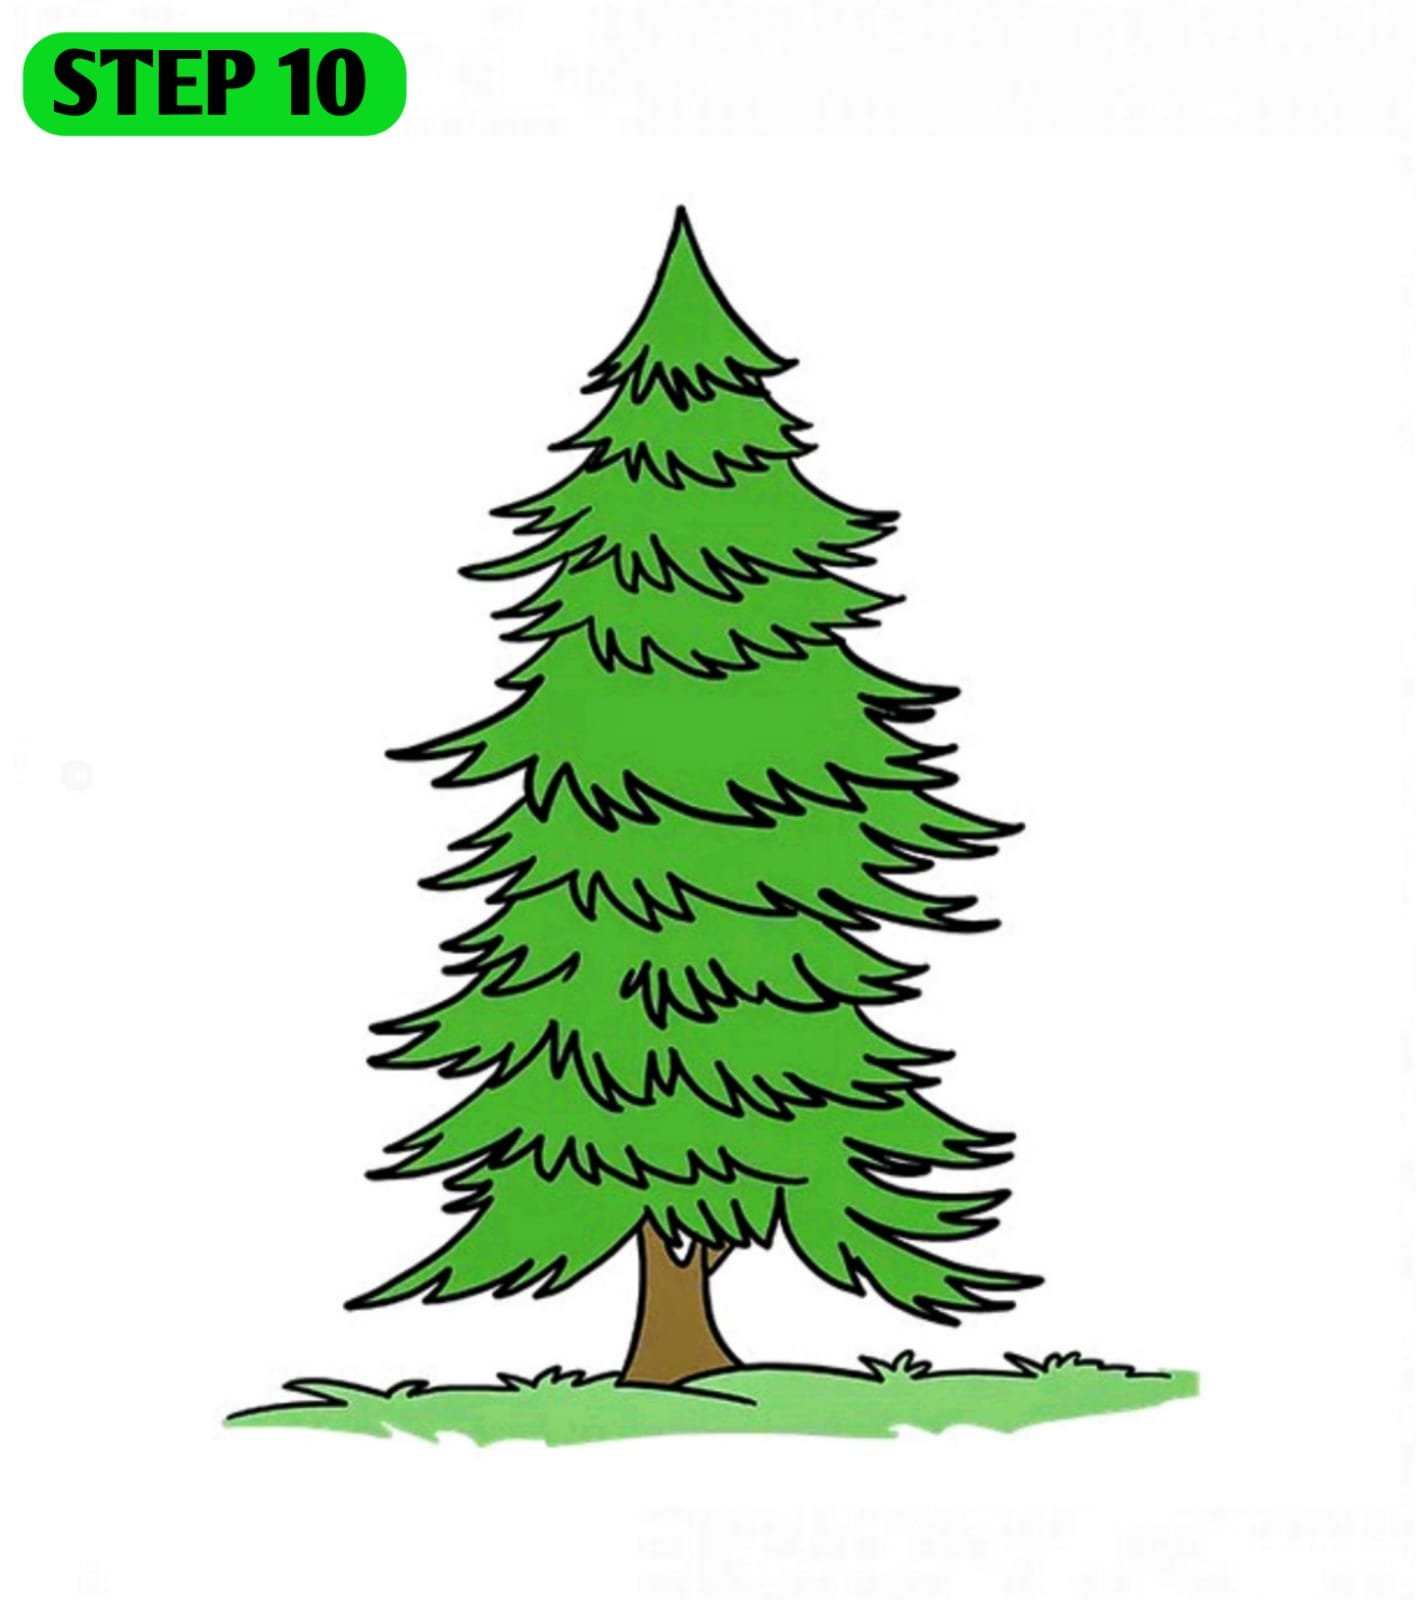 126326 Pine Trees Drawing Images Stock Photos  Vectors  Shutterstock